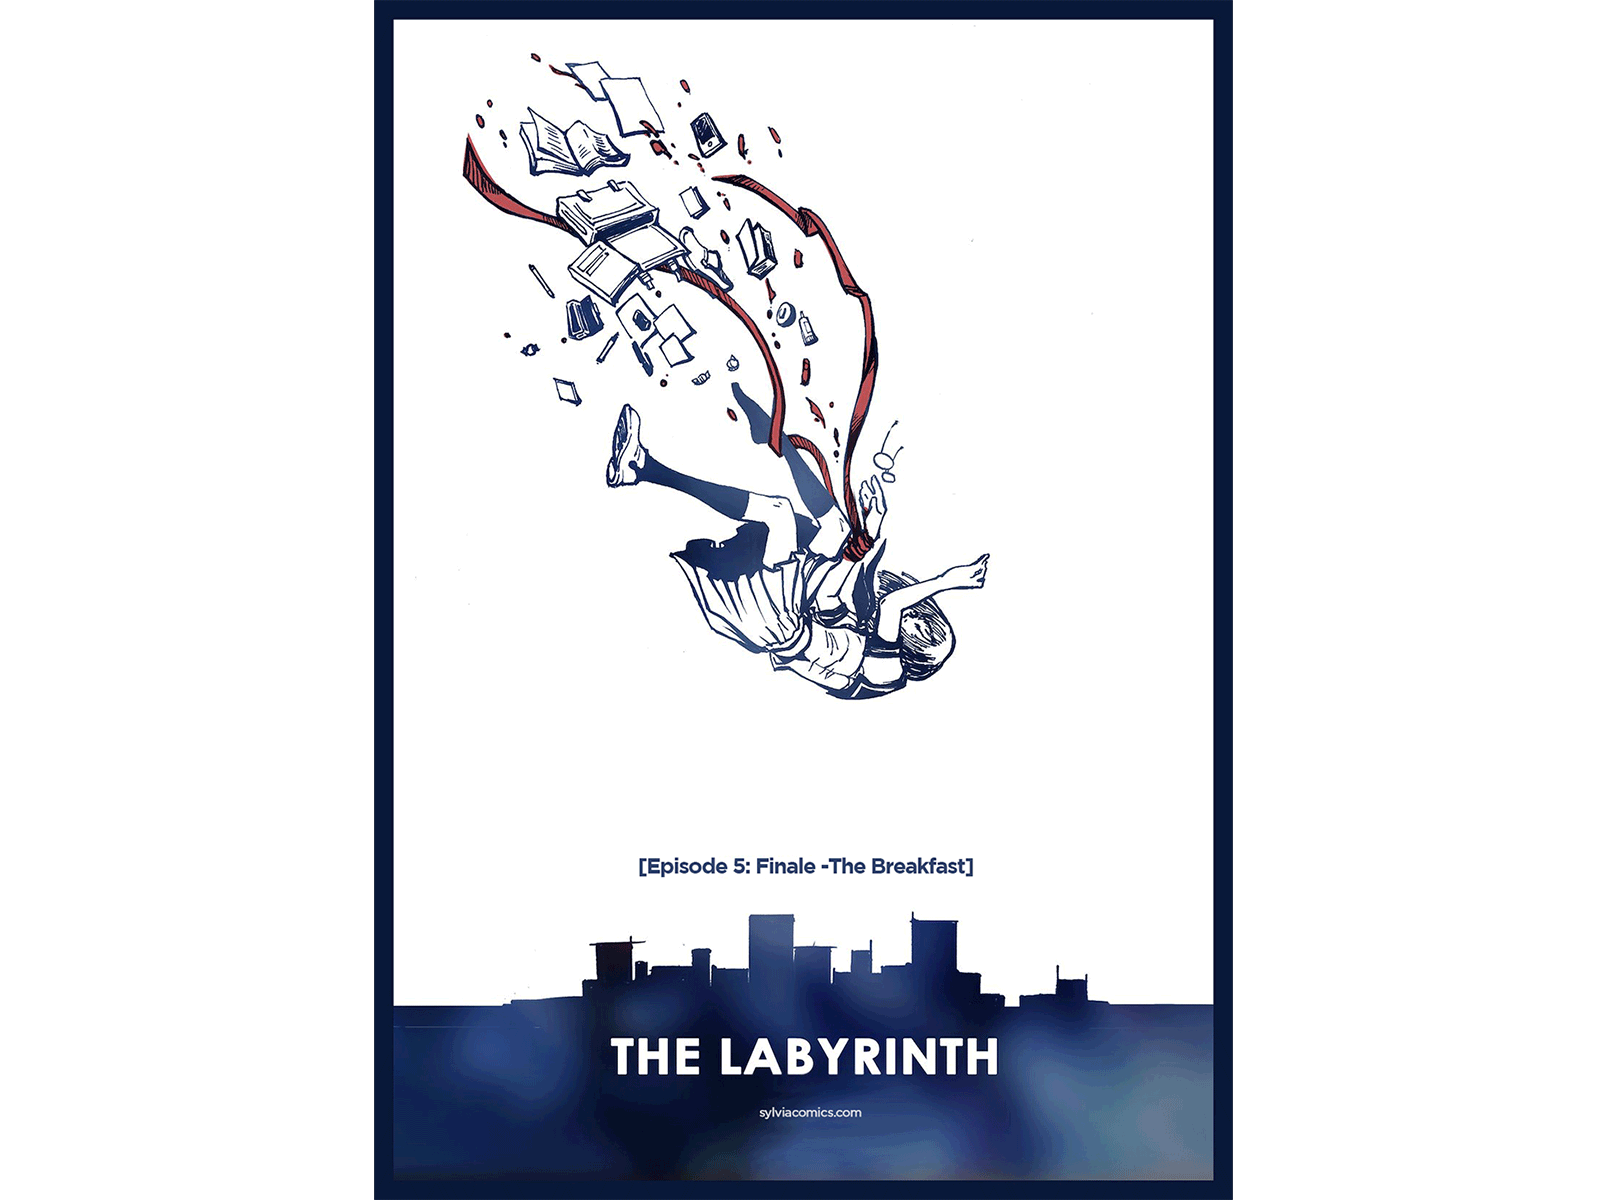 The Labyrinth 師走と森 (Cover - Finale)